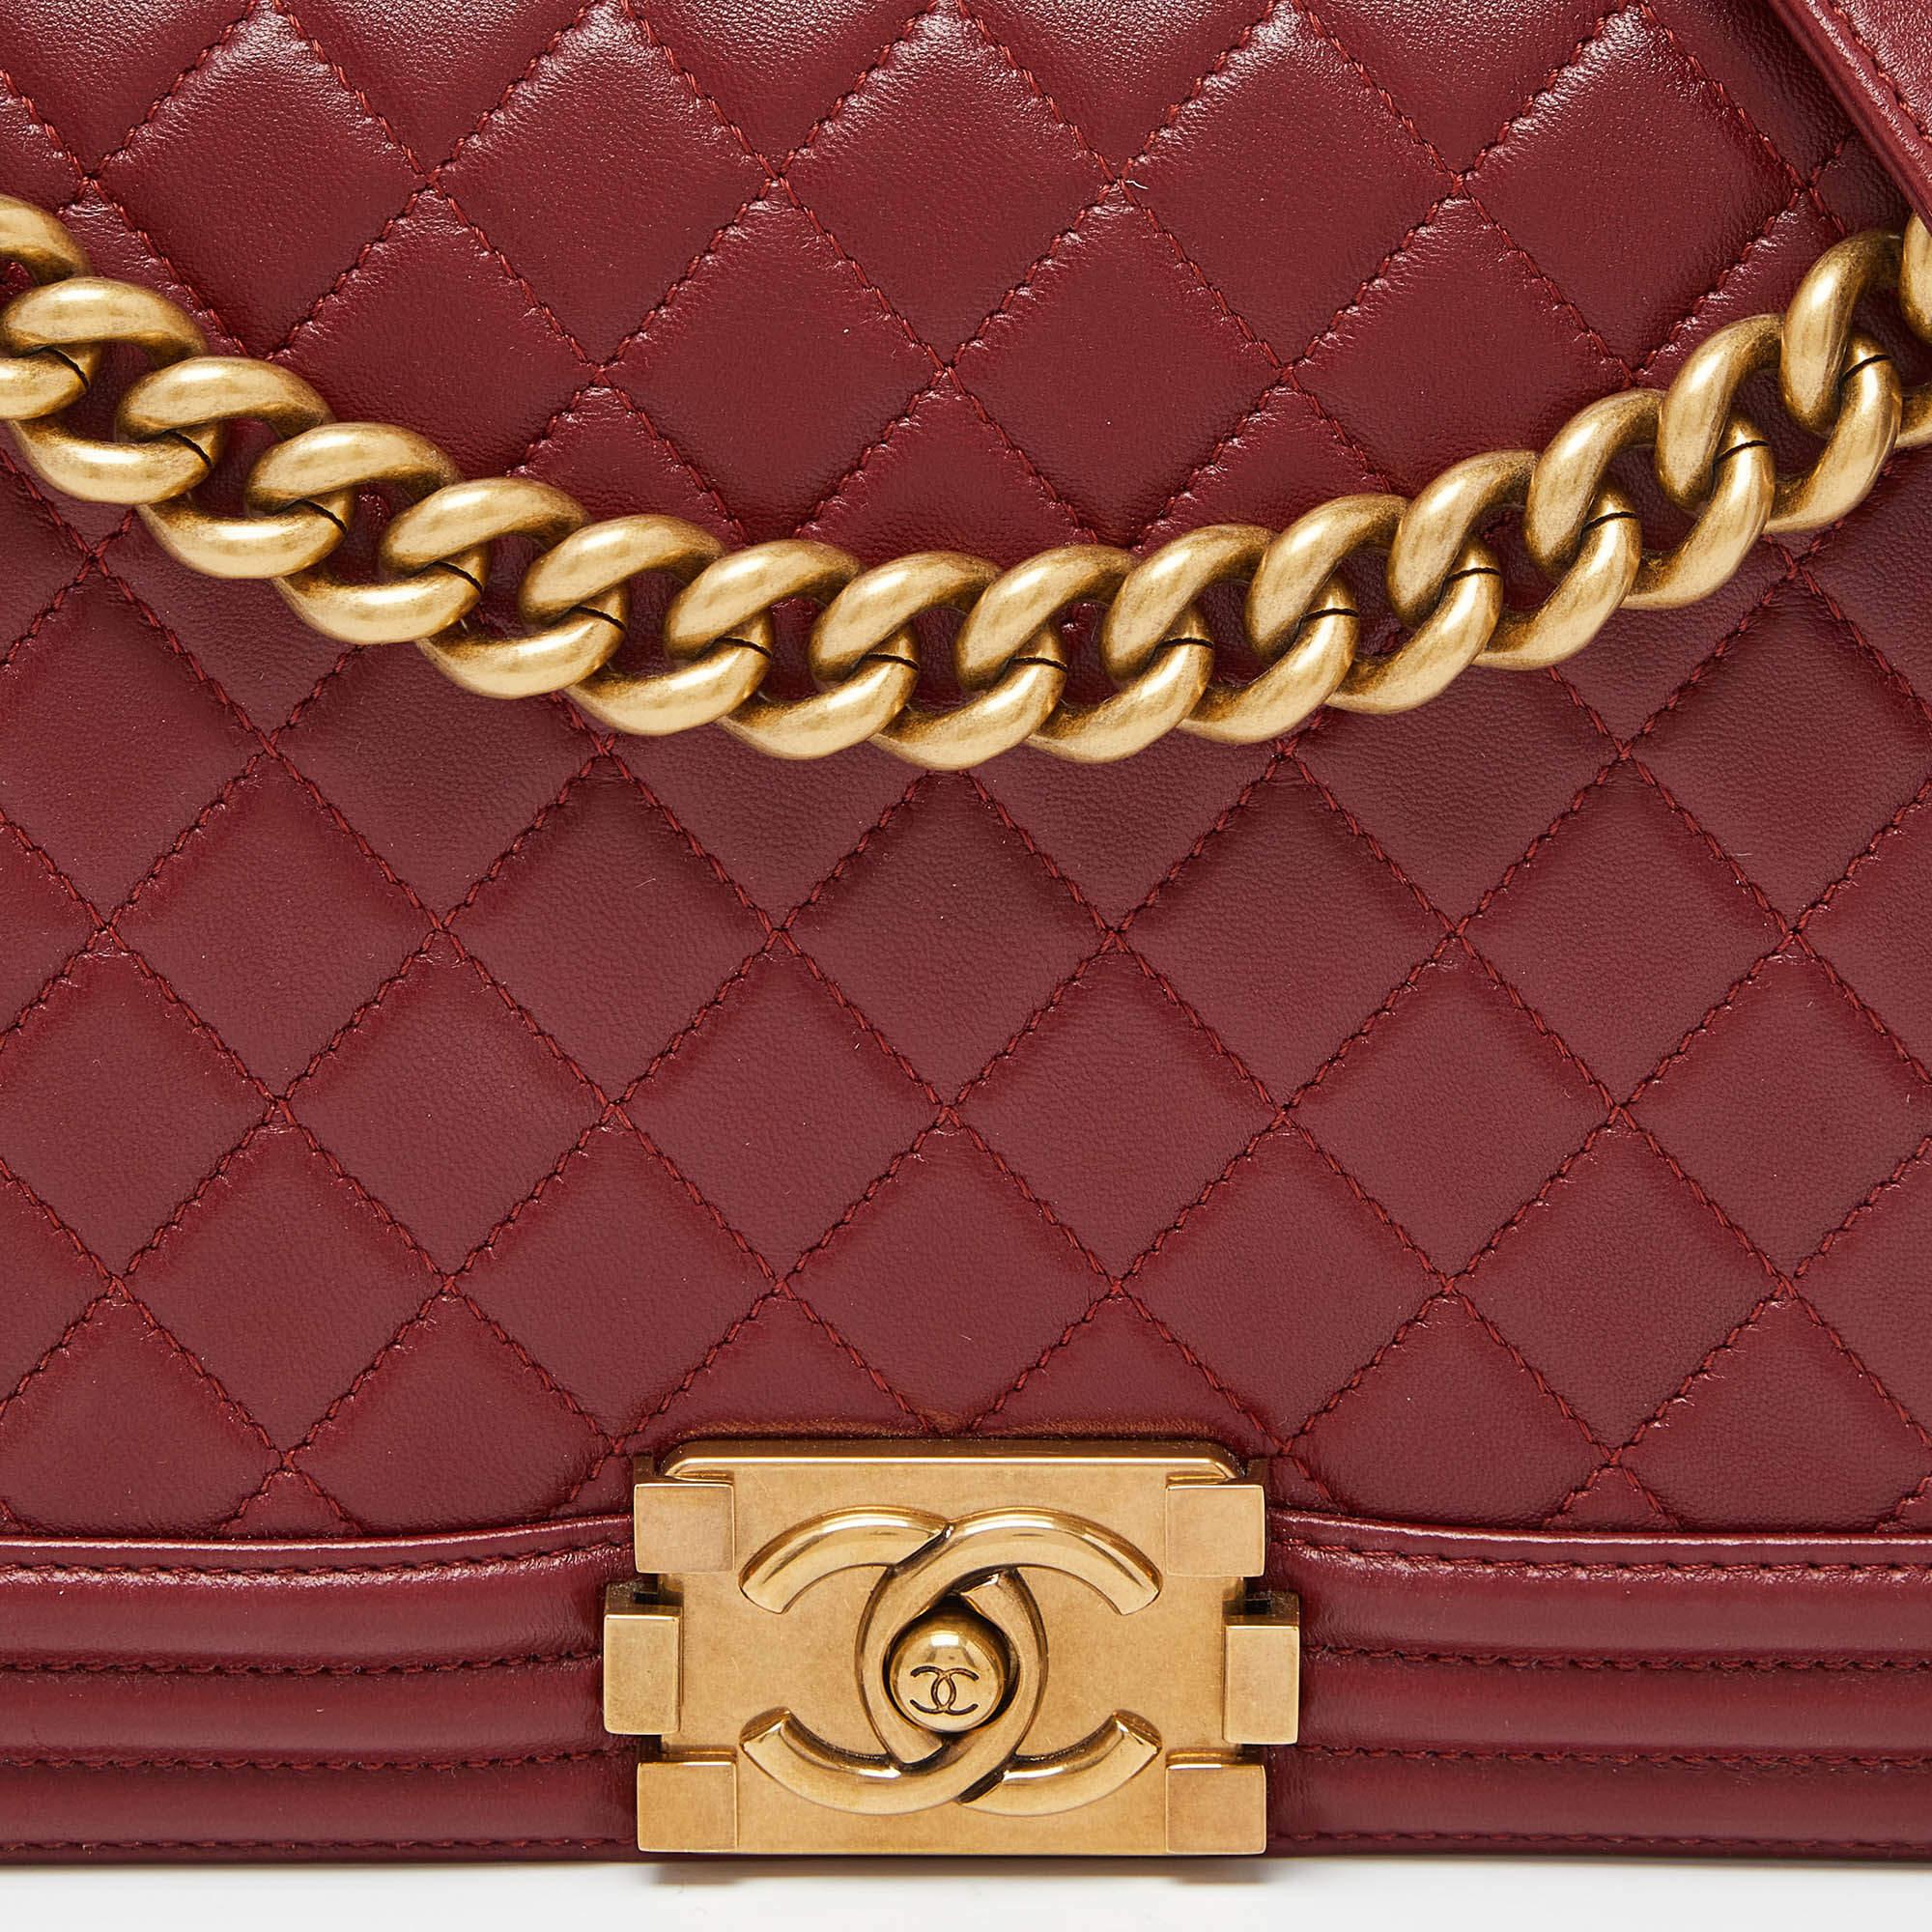 Chanel Red Quilted Leather New Medium Boy Shoulder Bag For Sale 3